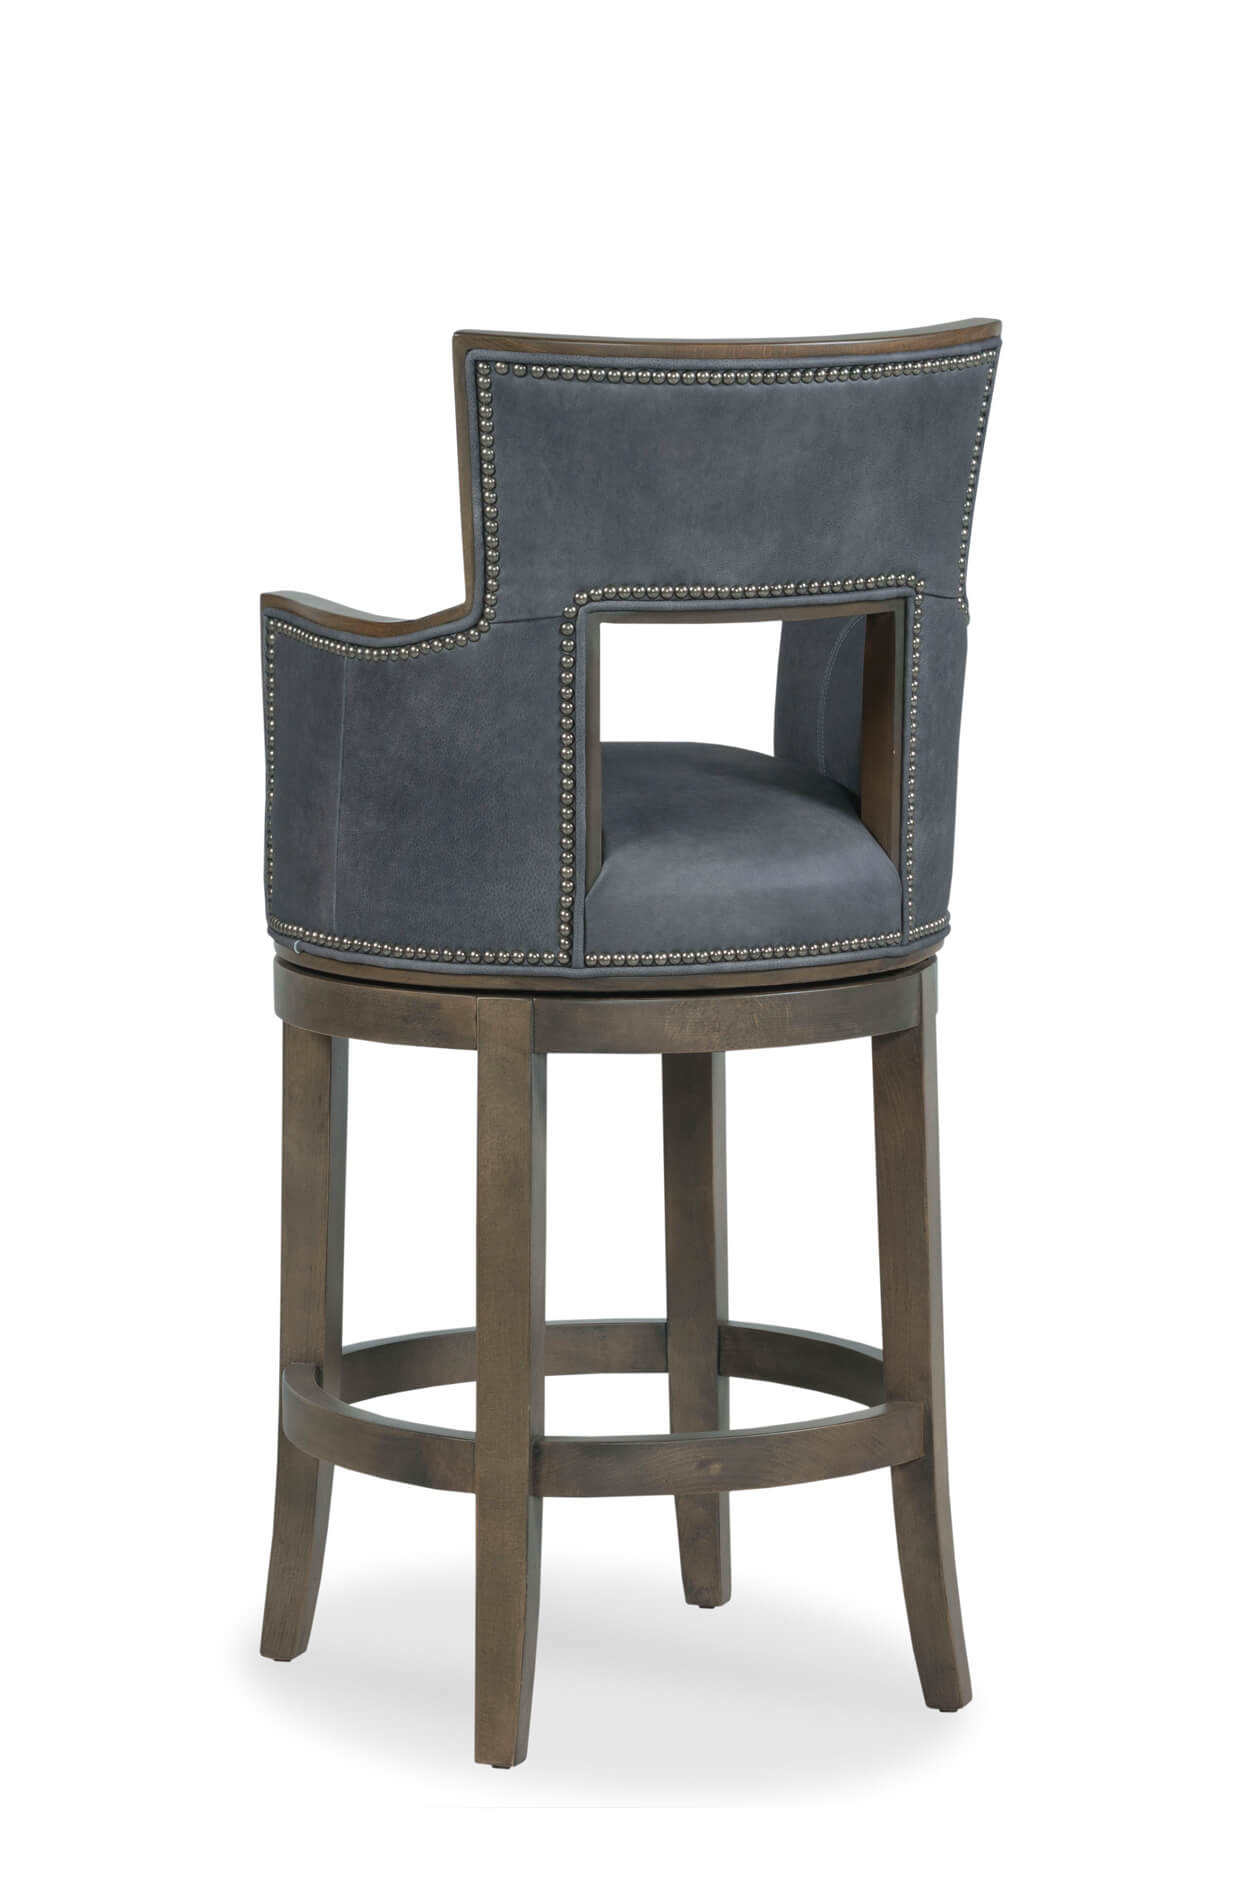 Sidecar Upholstered Wooden Swivel Stool, Leather Swivel Barstools With Back